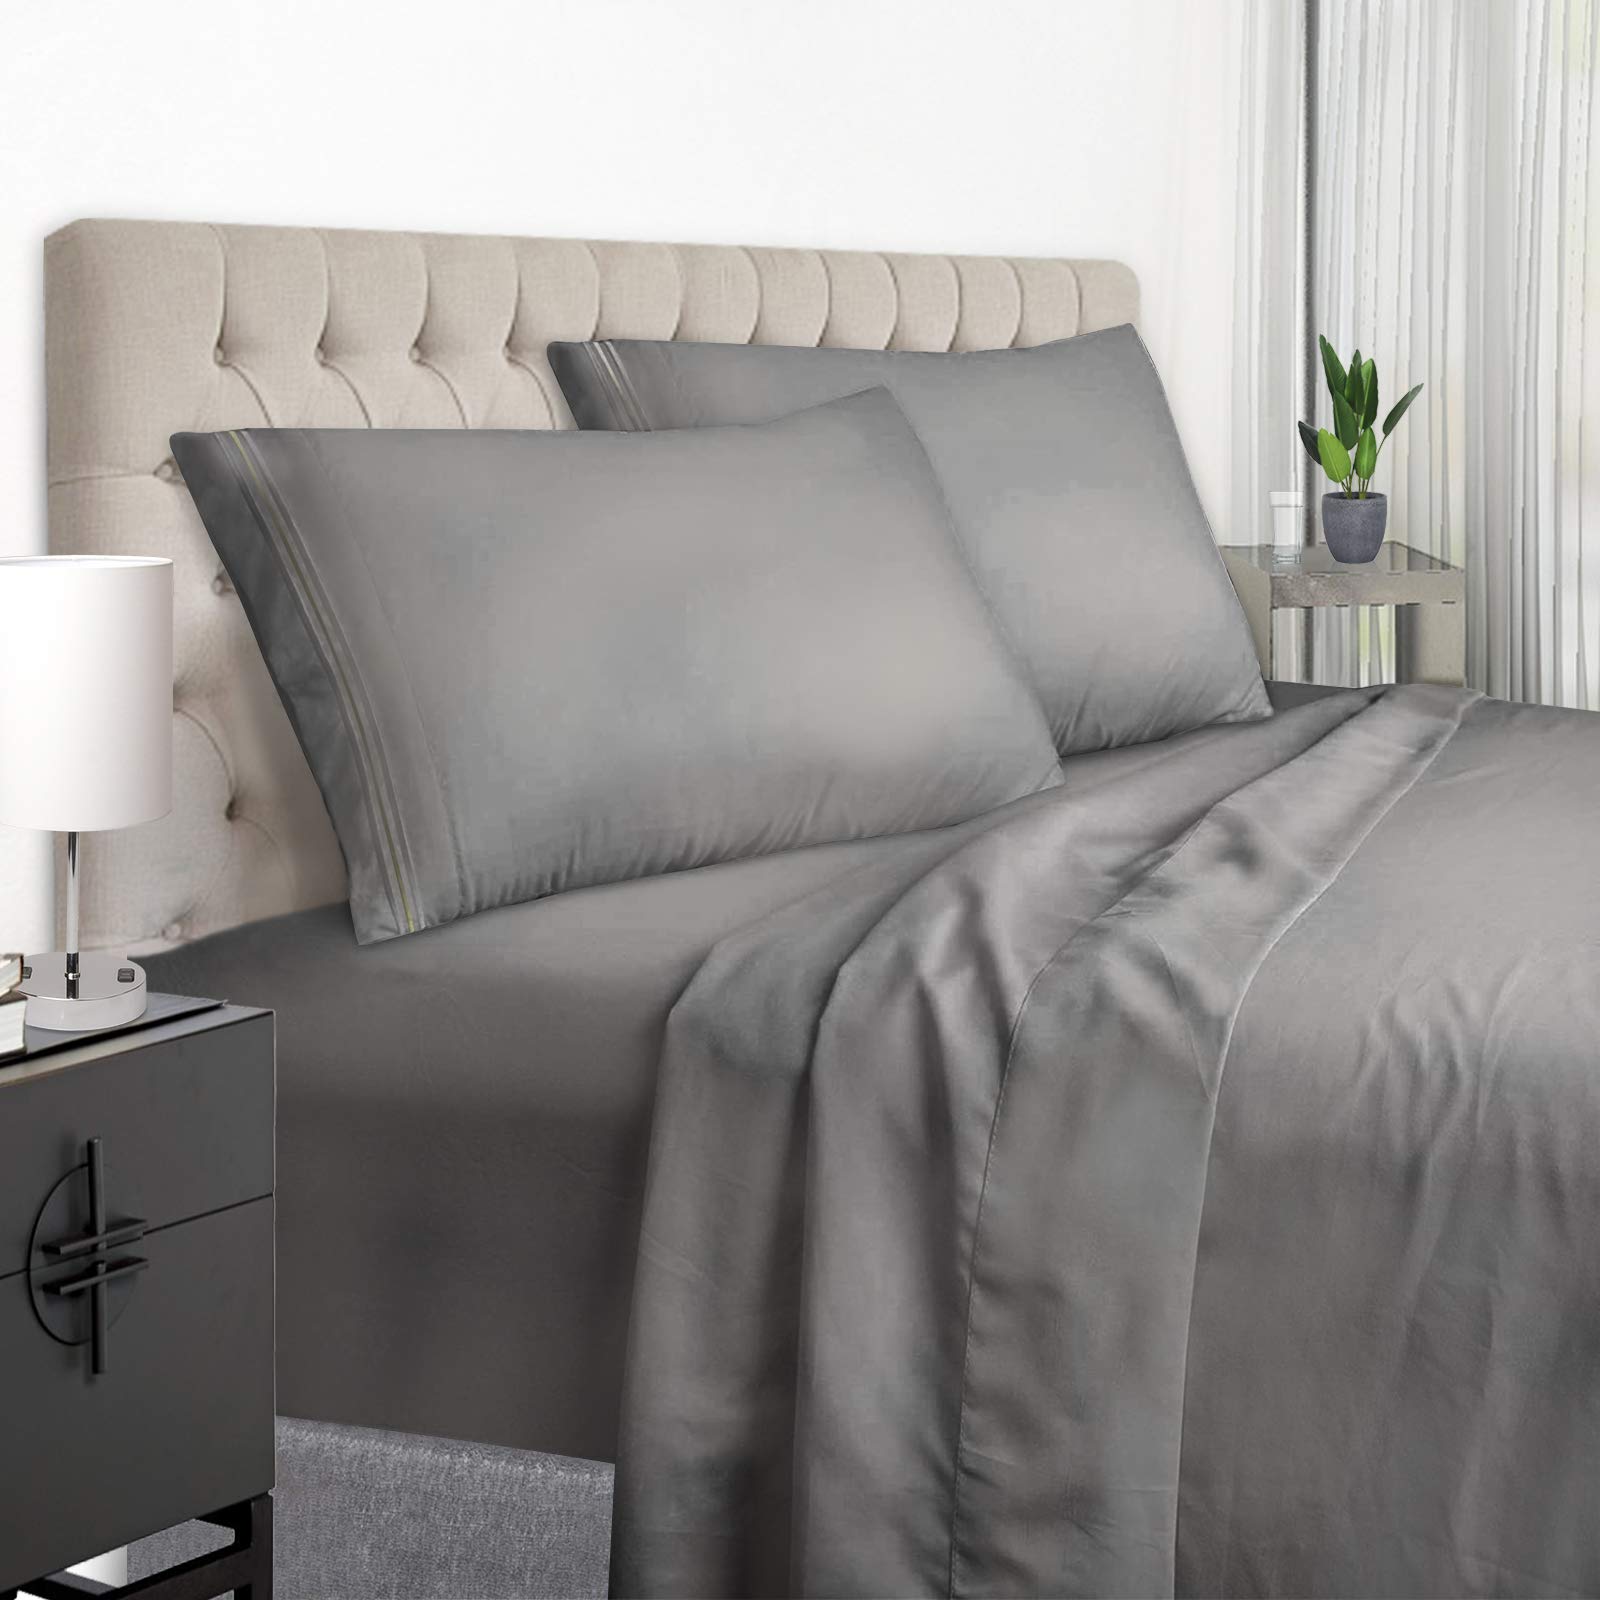 Easehome Grey Full Size Sheets - 1800 Thread Count Deep Pocket To 21 Inches Mattress 4 Piece - Premium Bedding Sheets Pillowcases Collect